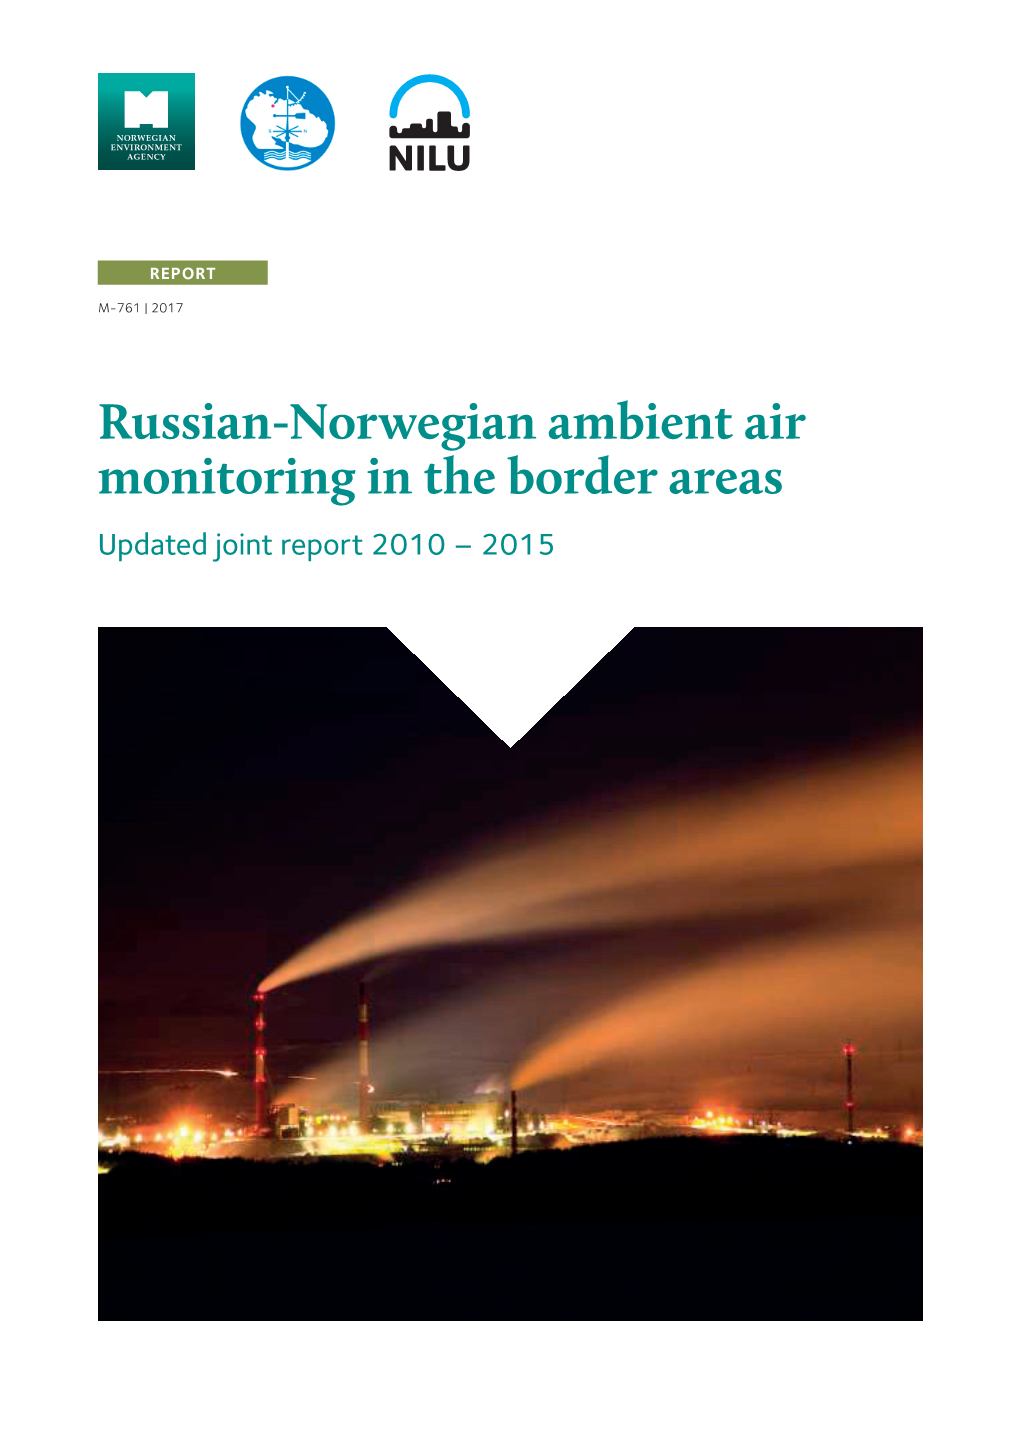 Russian-Norwegian Ambient Air Monitoring in the Border Areas